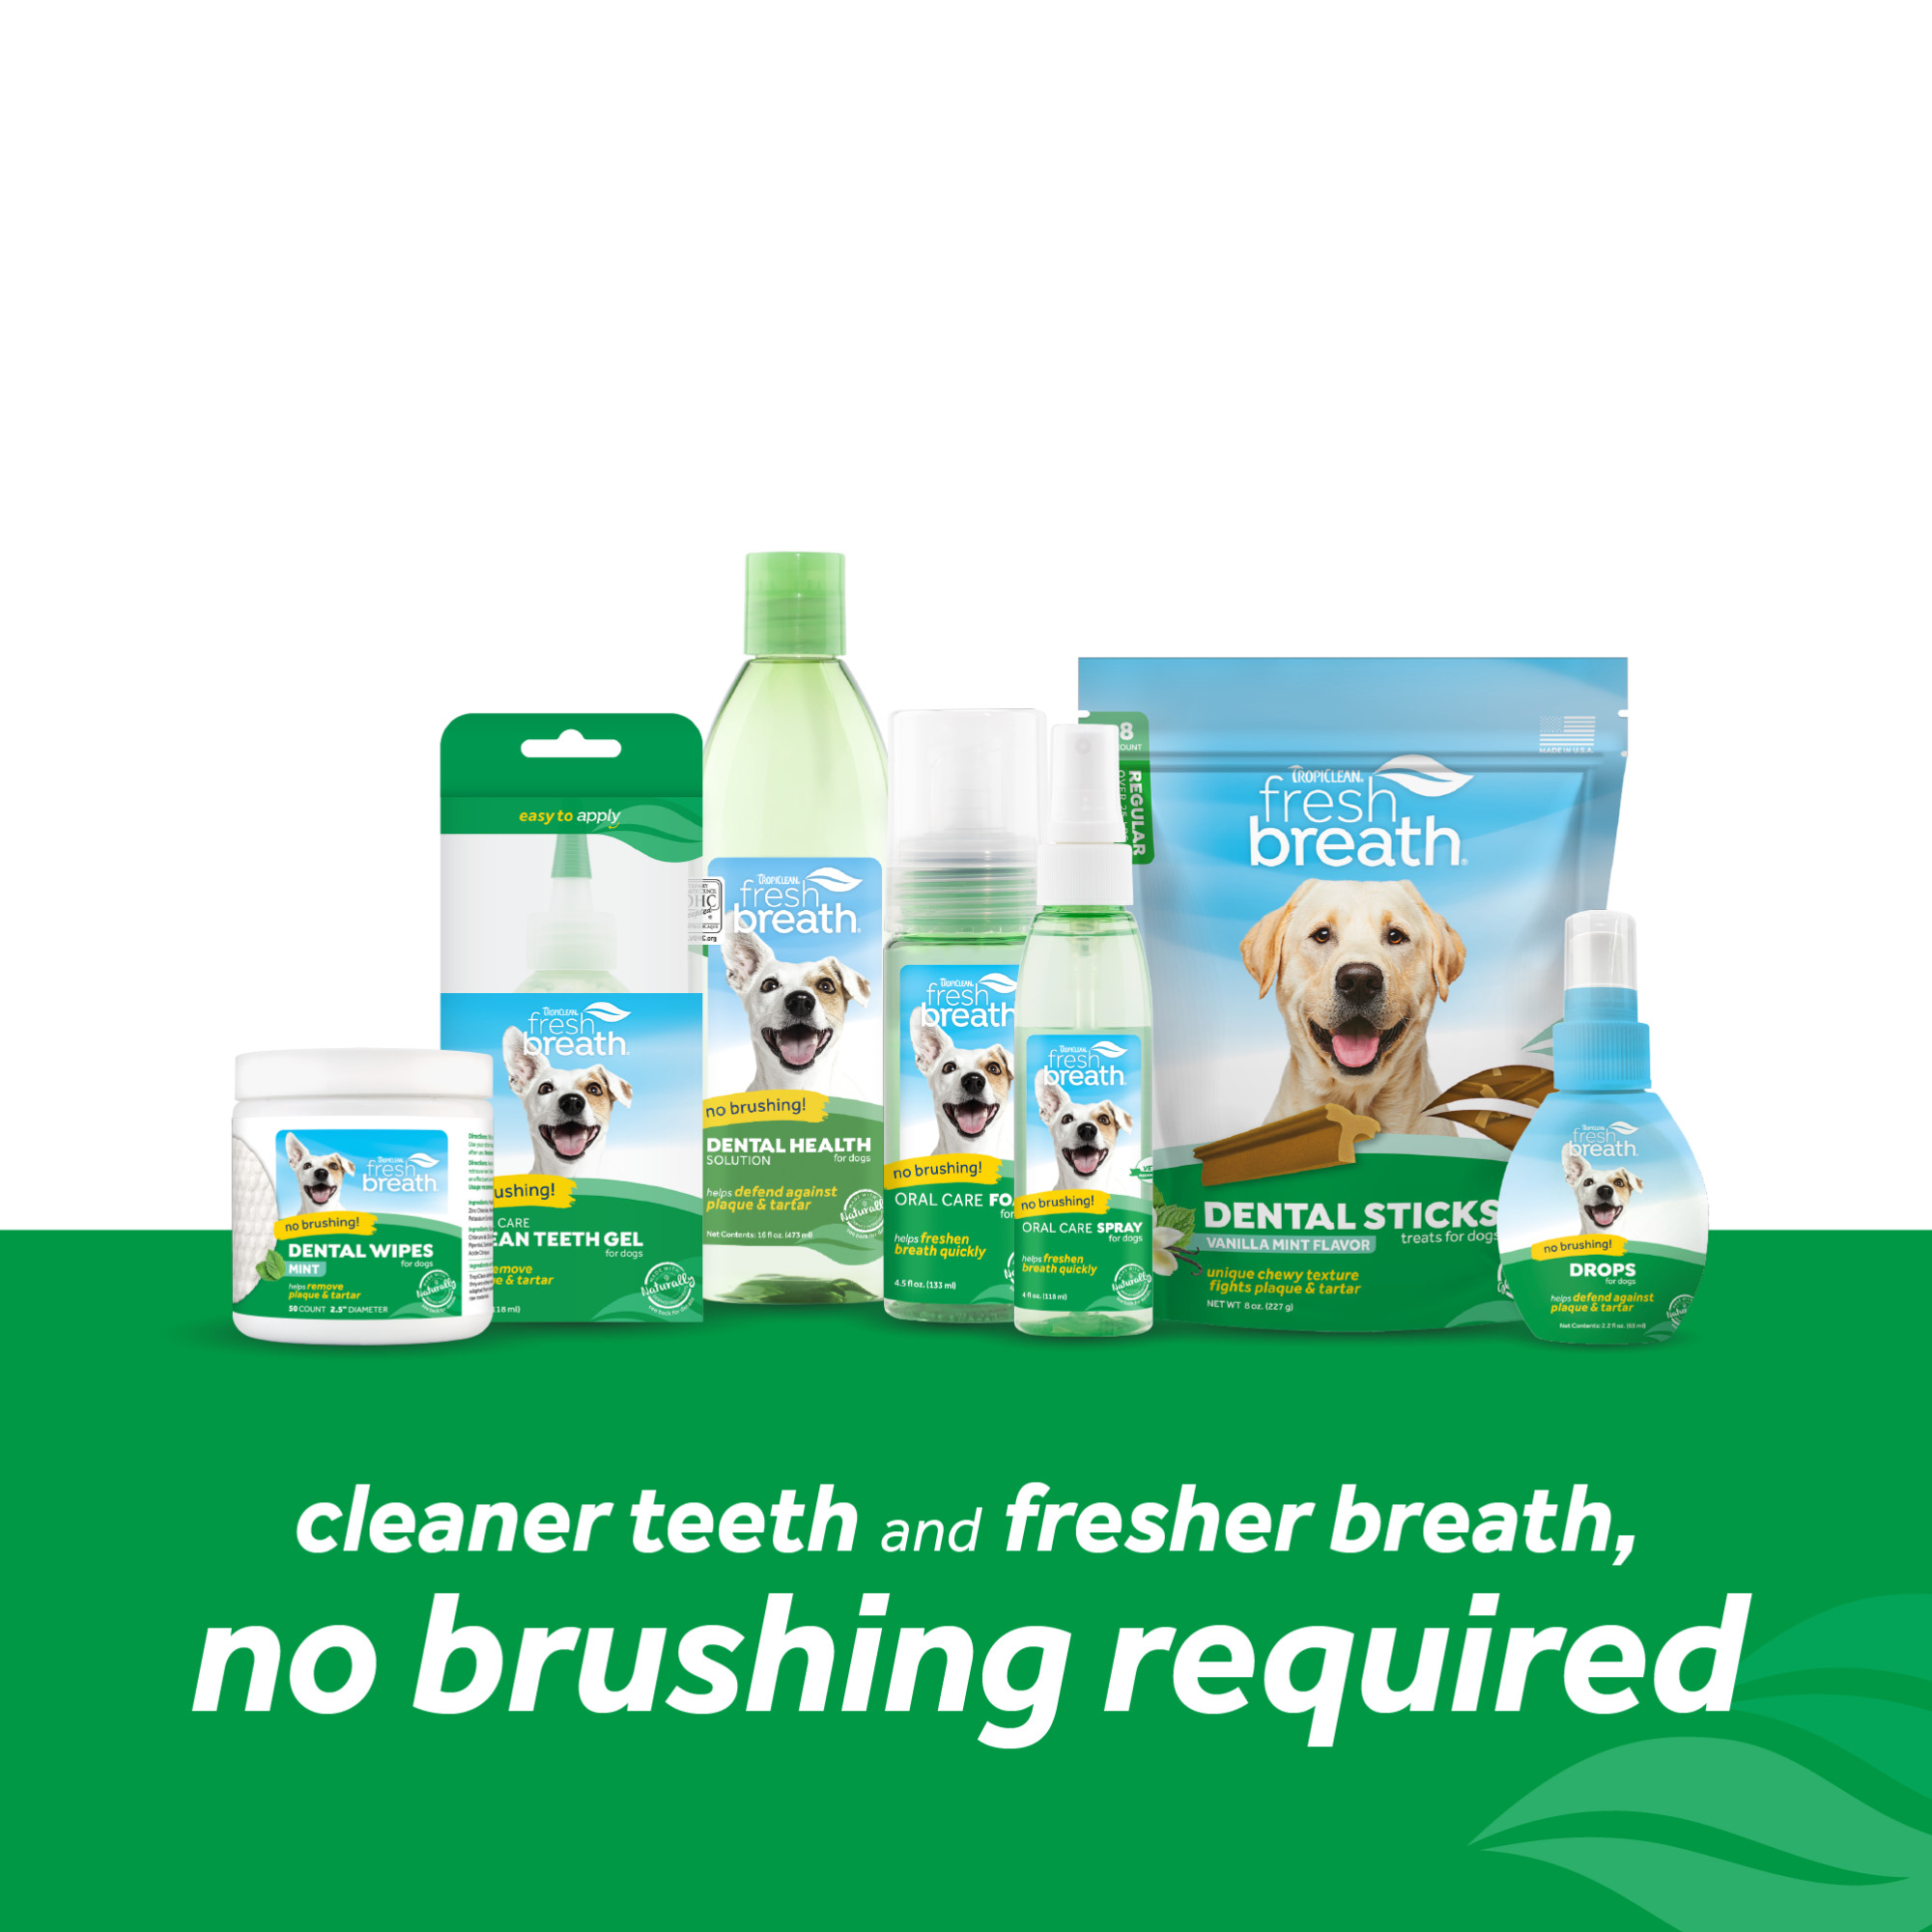 Oral Care Spray for Dogs – Peanut Butter Flavor